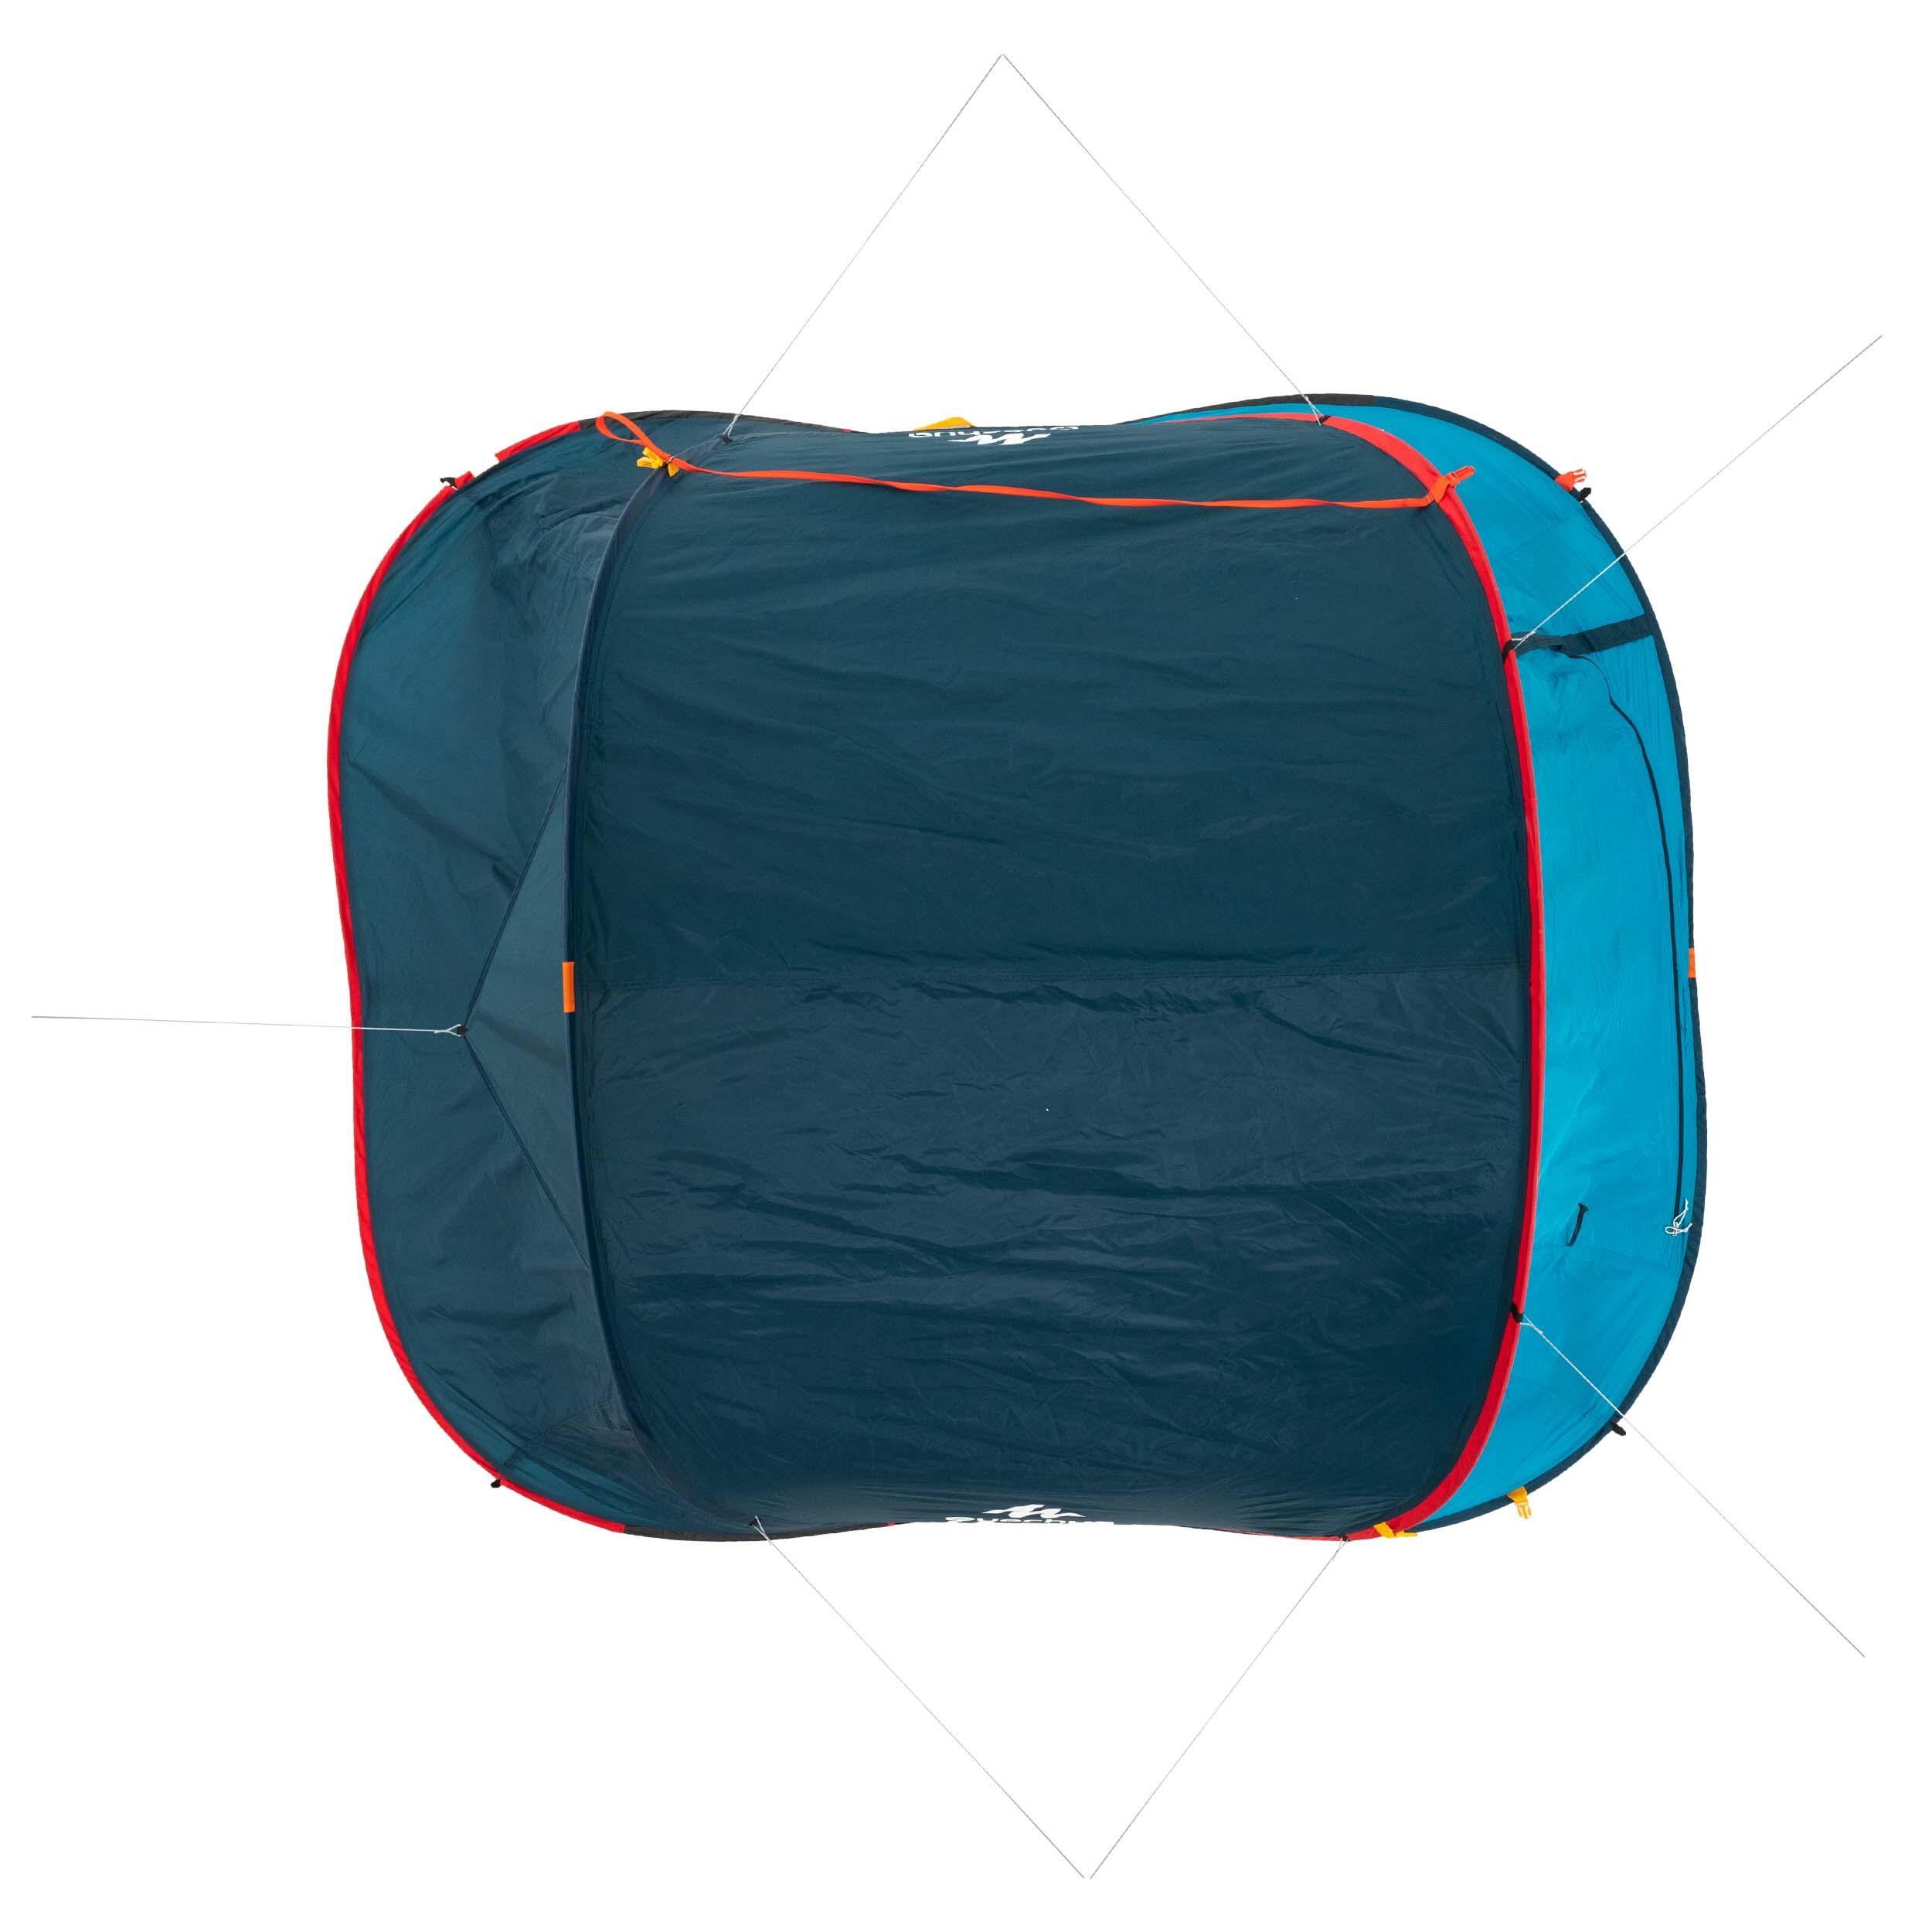 Camping tent - 2 SECONDS - 3-person 9/26